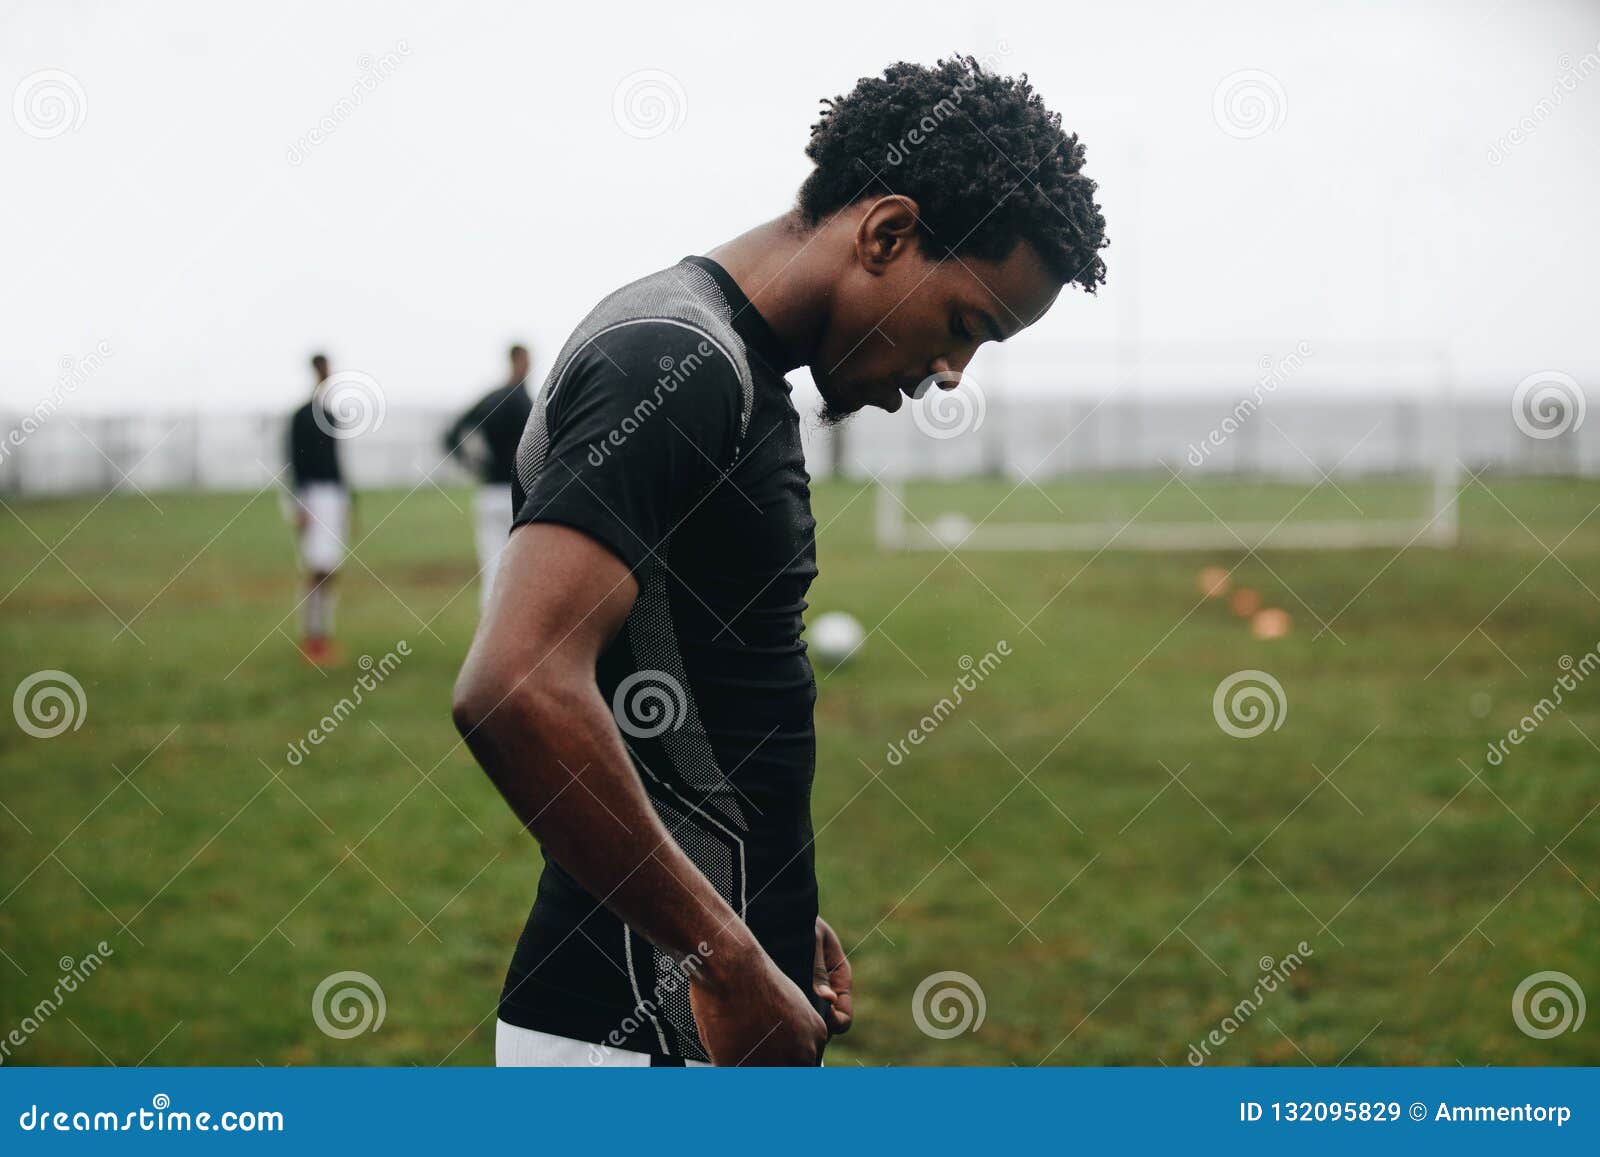 Close Up Of A Soccer Player Standing On Field Stock Image Image Of African Person